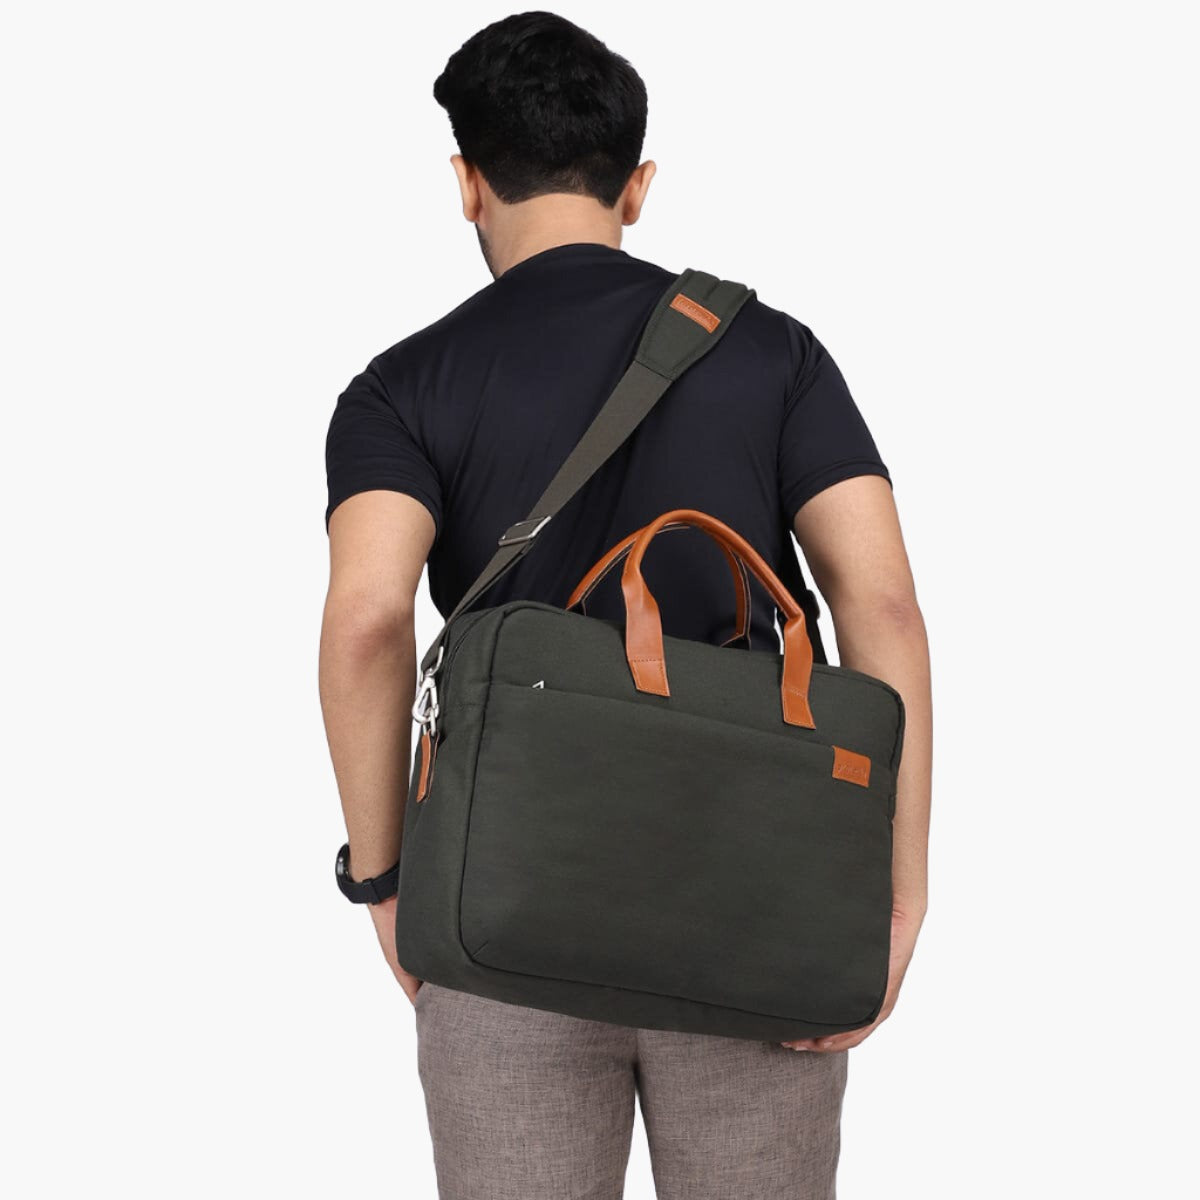 Olive | Protecta The Strong Buzz Office Laptop Bag - 3